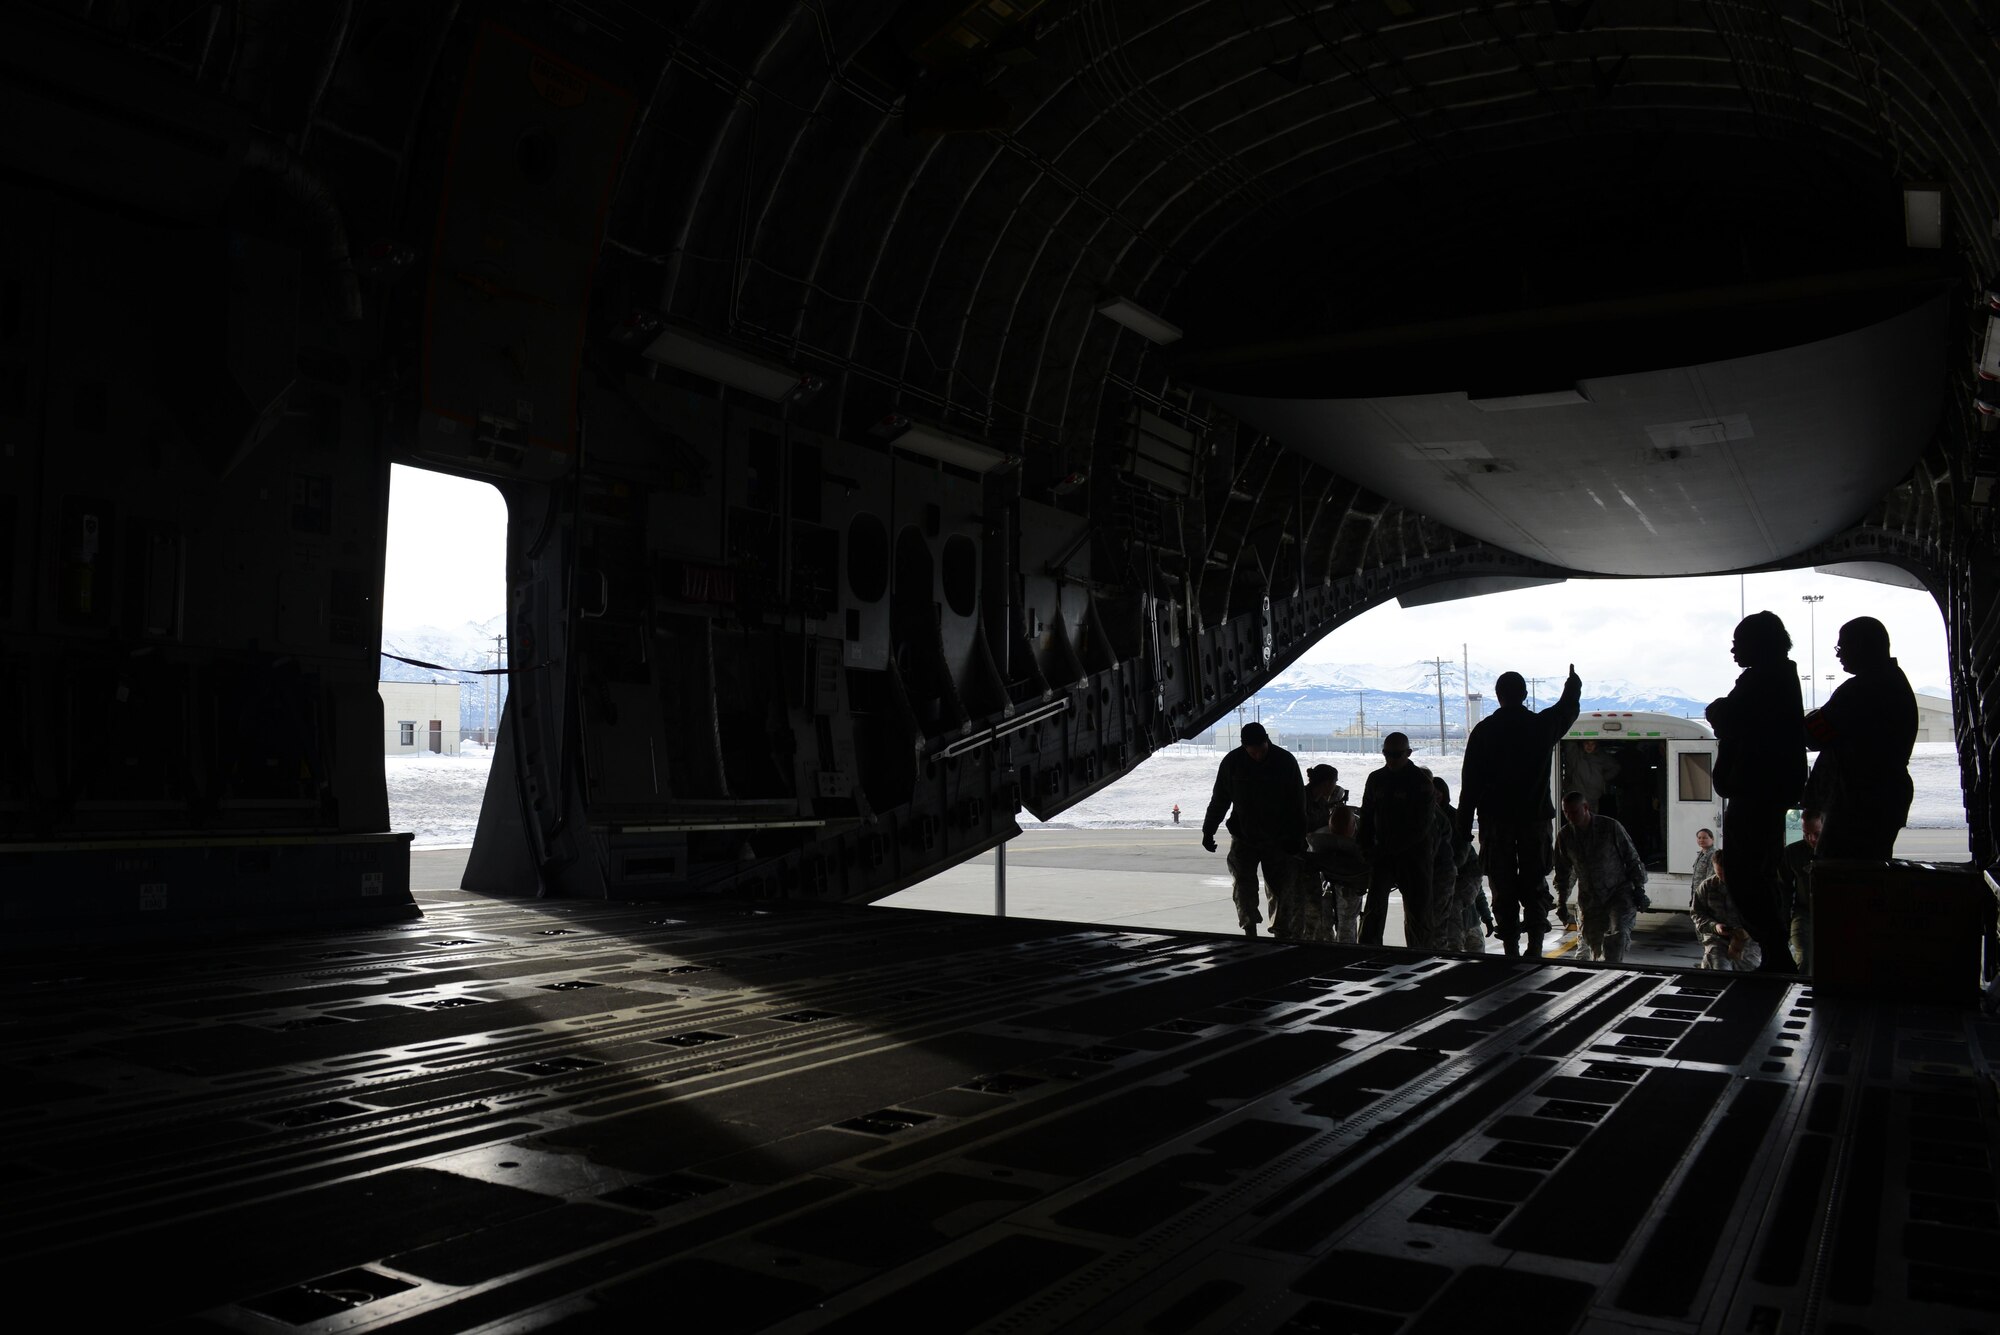 673d Medical Group Airmen transport a simulated patient from a bus into a C-17 Globemaster III during the EnRoute Patient Staging System exercise at Joint Base Elmendorf-Richardson, Alaska, April 3, 2017. The ERPSS provides patient reception and limited emergent intervention, and ensures patients are medically and administratively prepared for flight in a safe and timely aeromedical evacuation. 